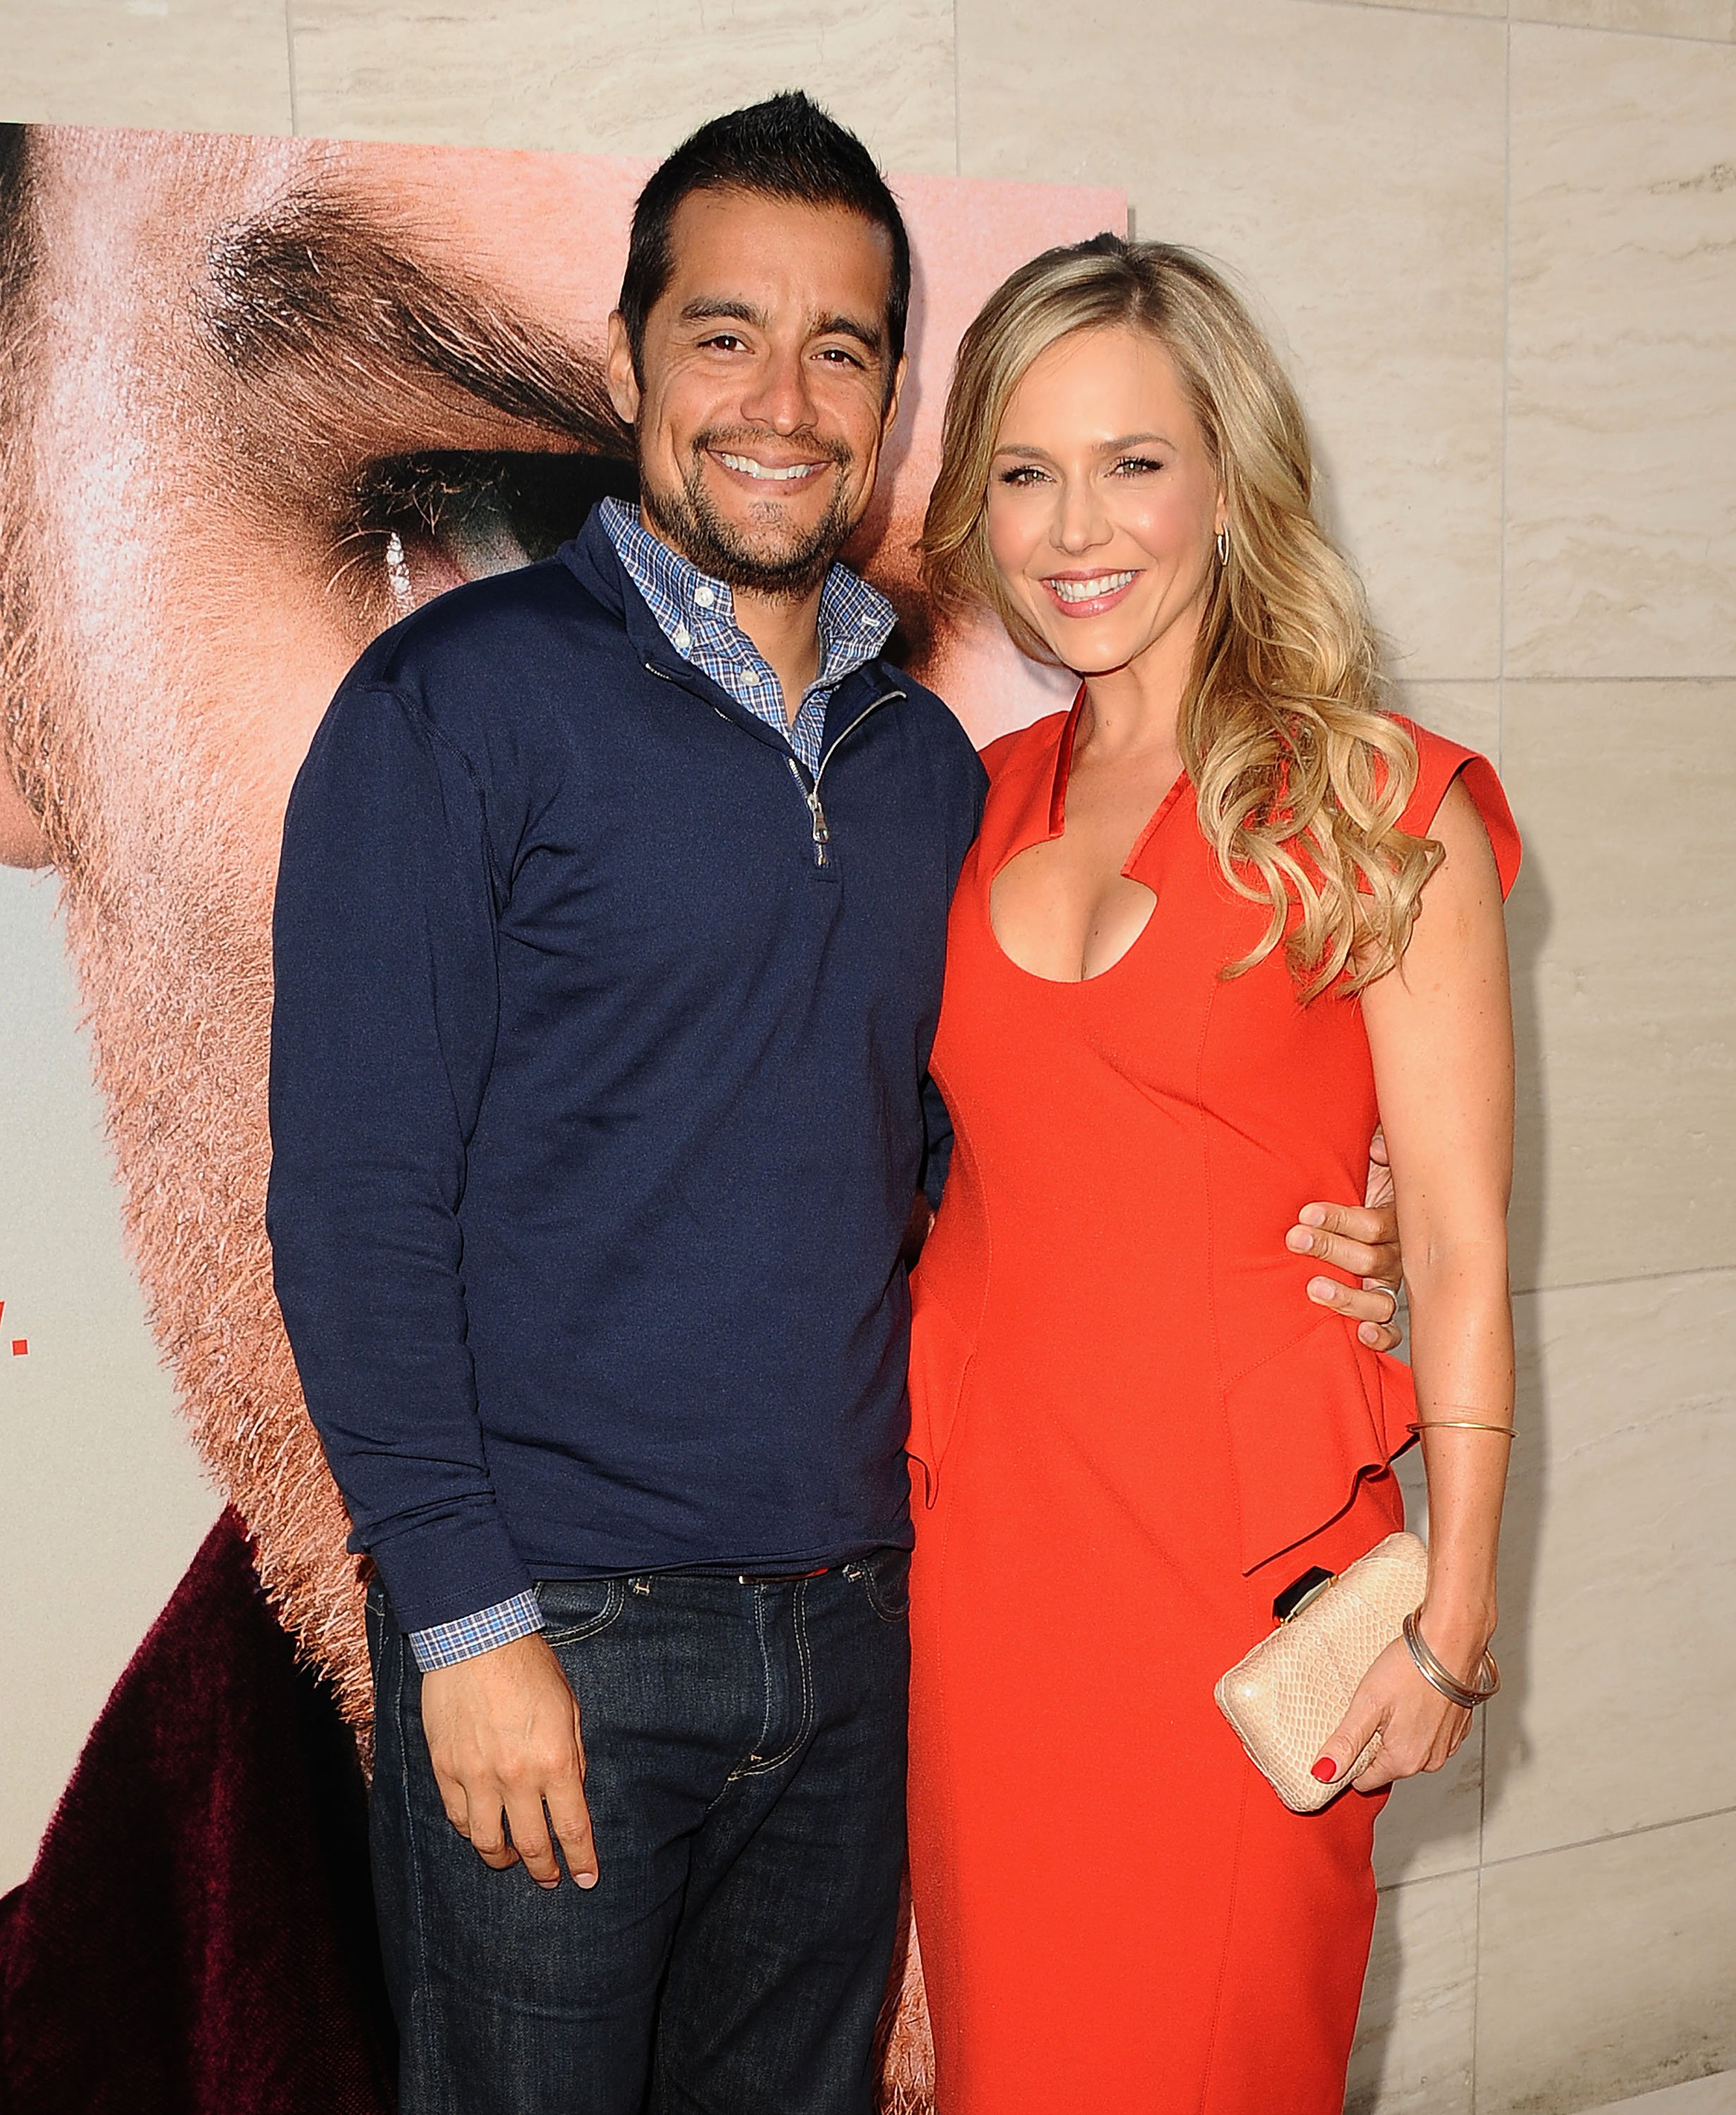 Rich Orosco and Julie Benz at the "Dexter" finale season premiere party on June 15, 2013, in Hollywood | Source: Getty Images